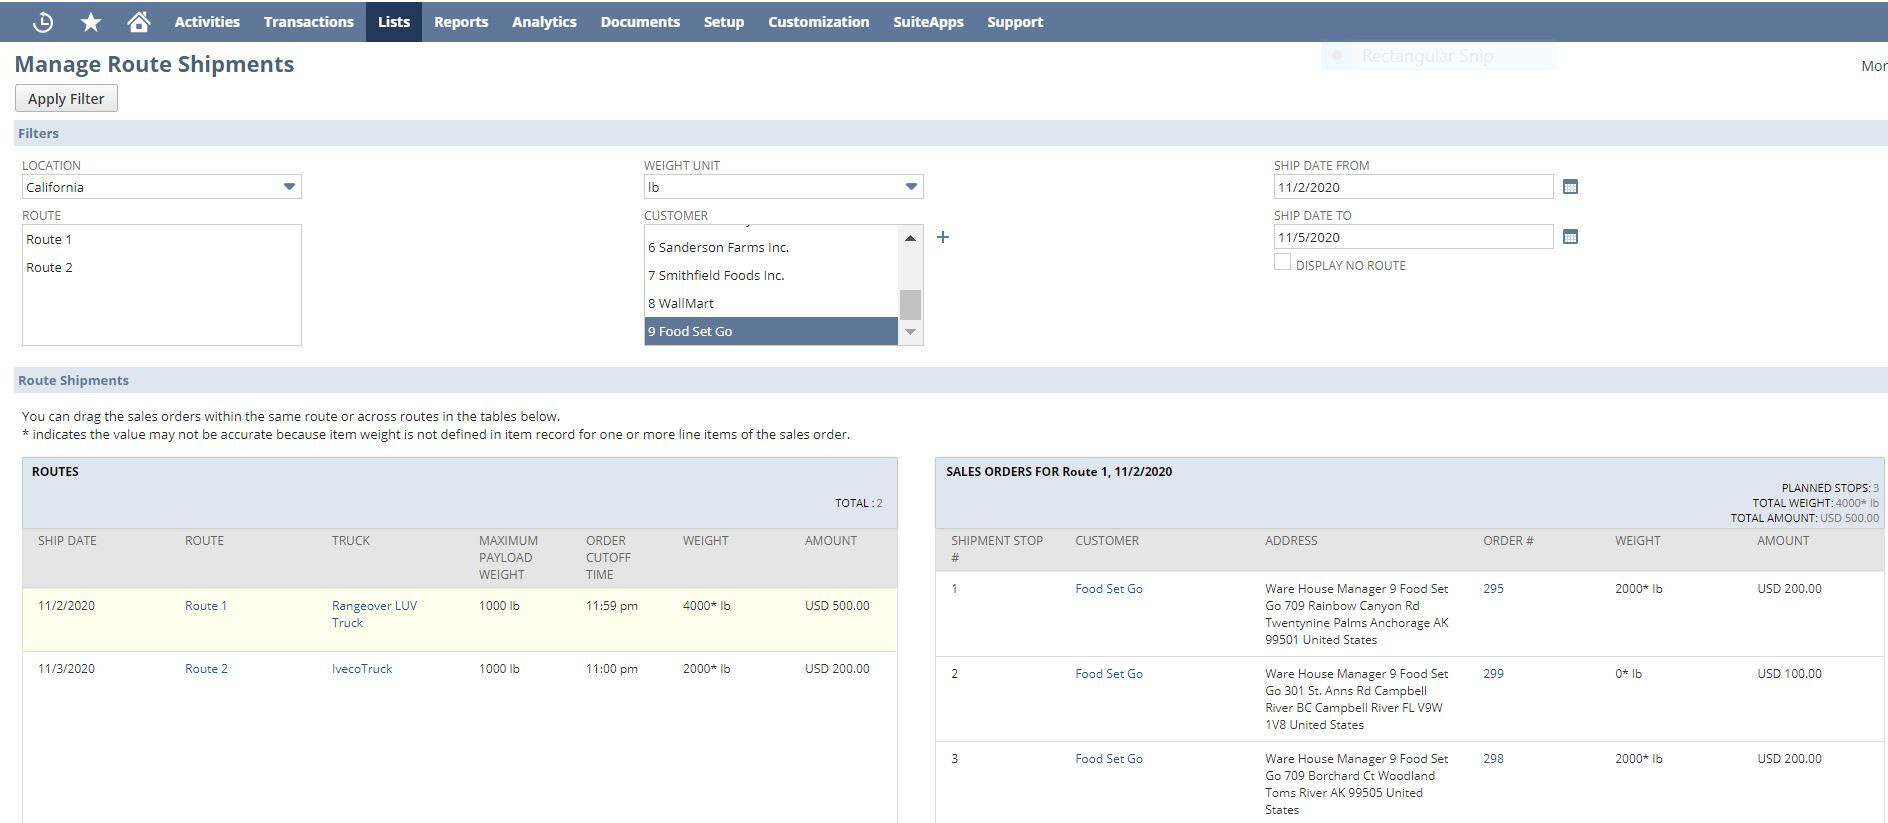 Manage Route Shipments page